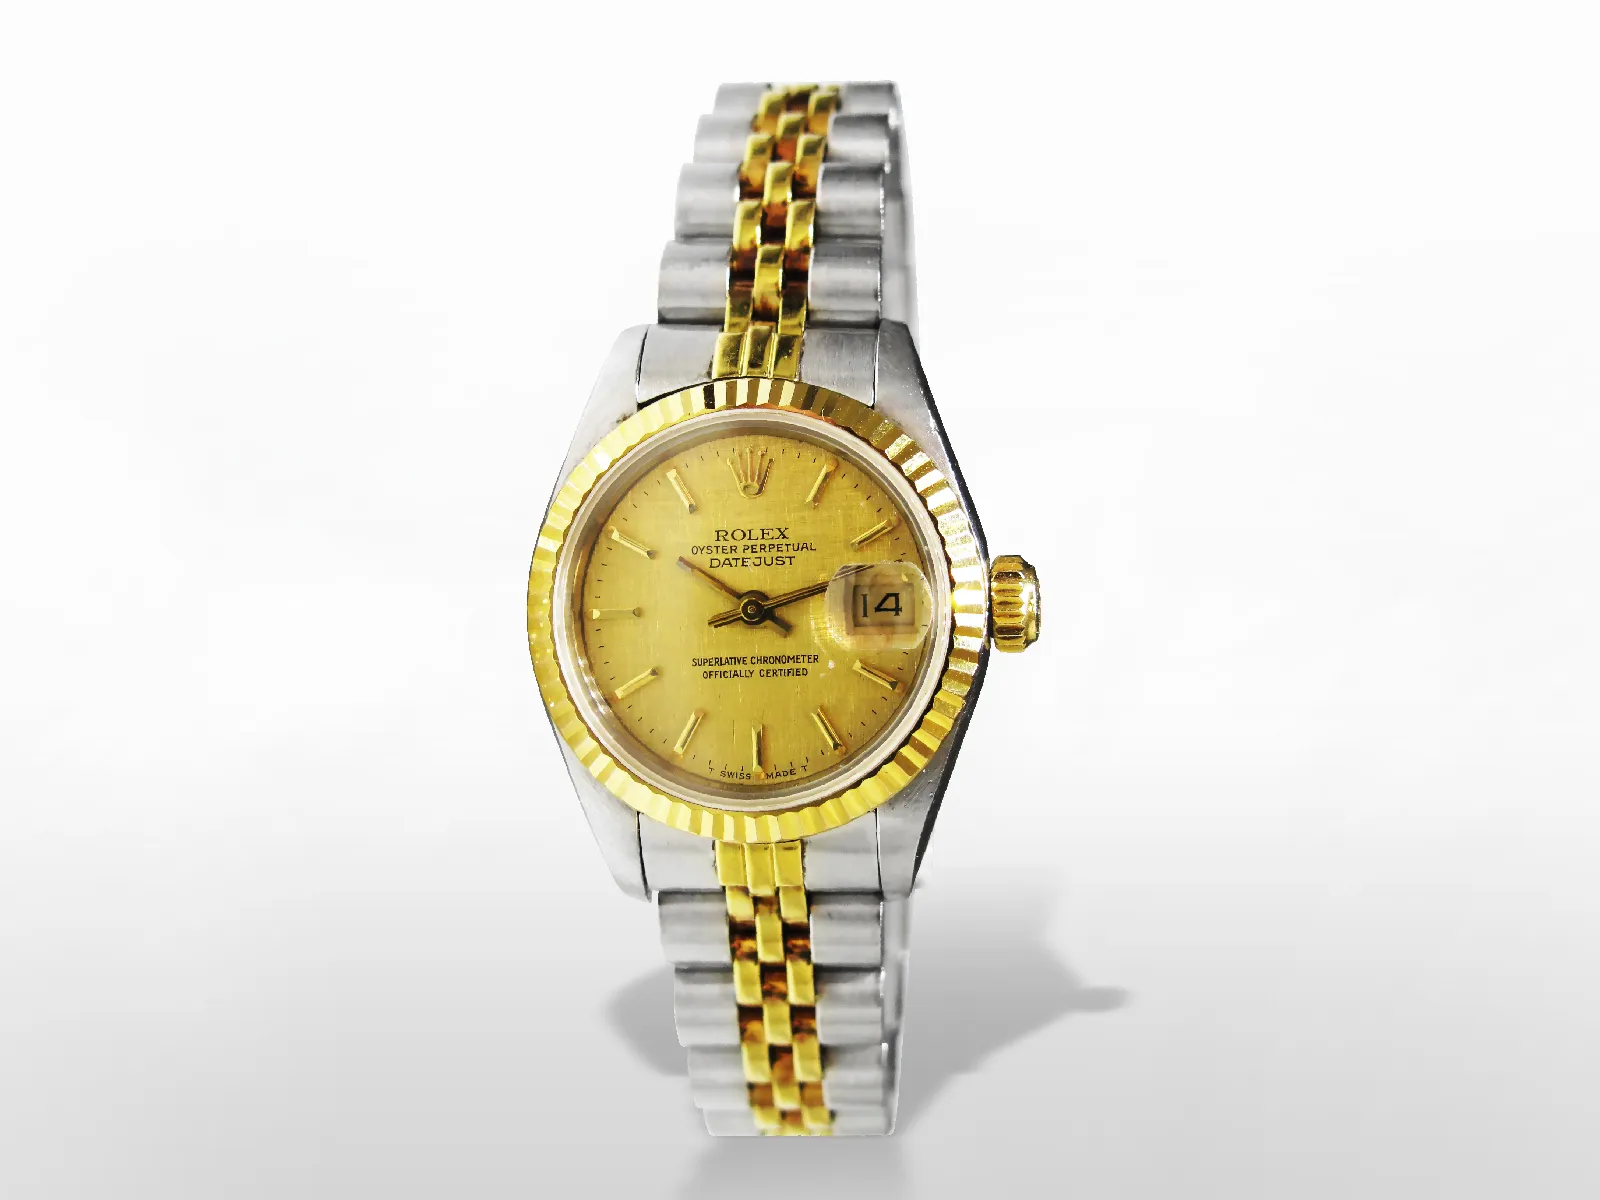 Rolex Datejust 26mm Yellow gold and stainless steel Champagne